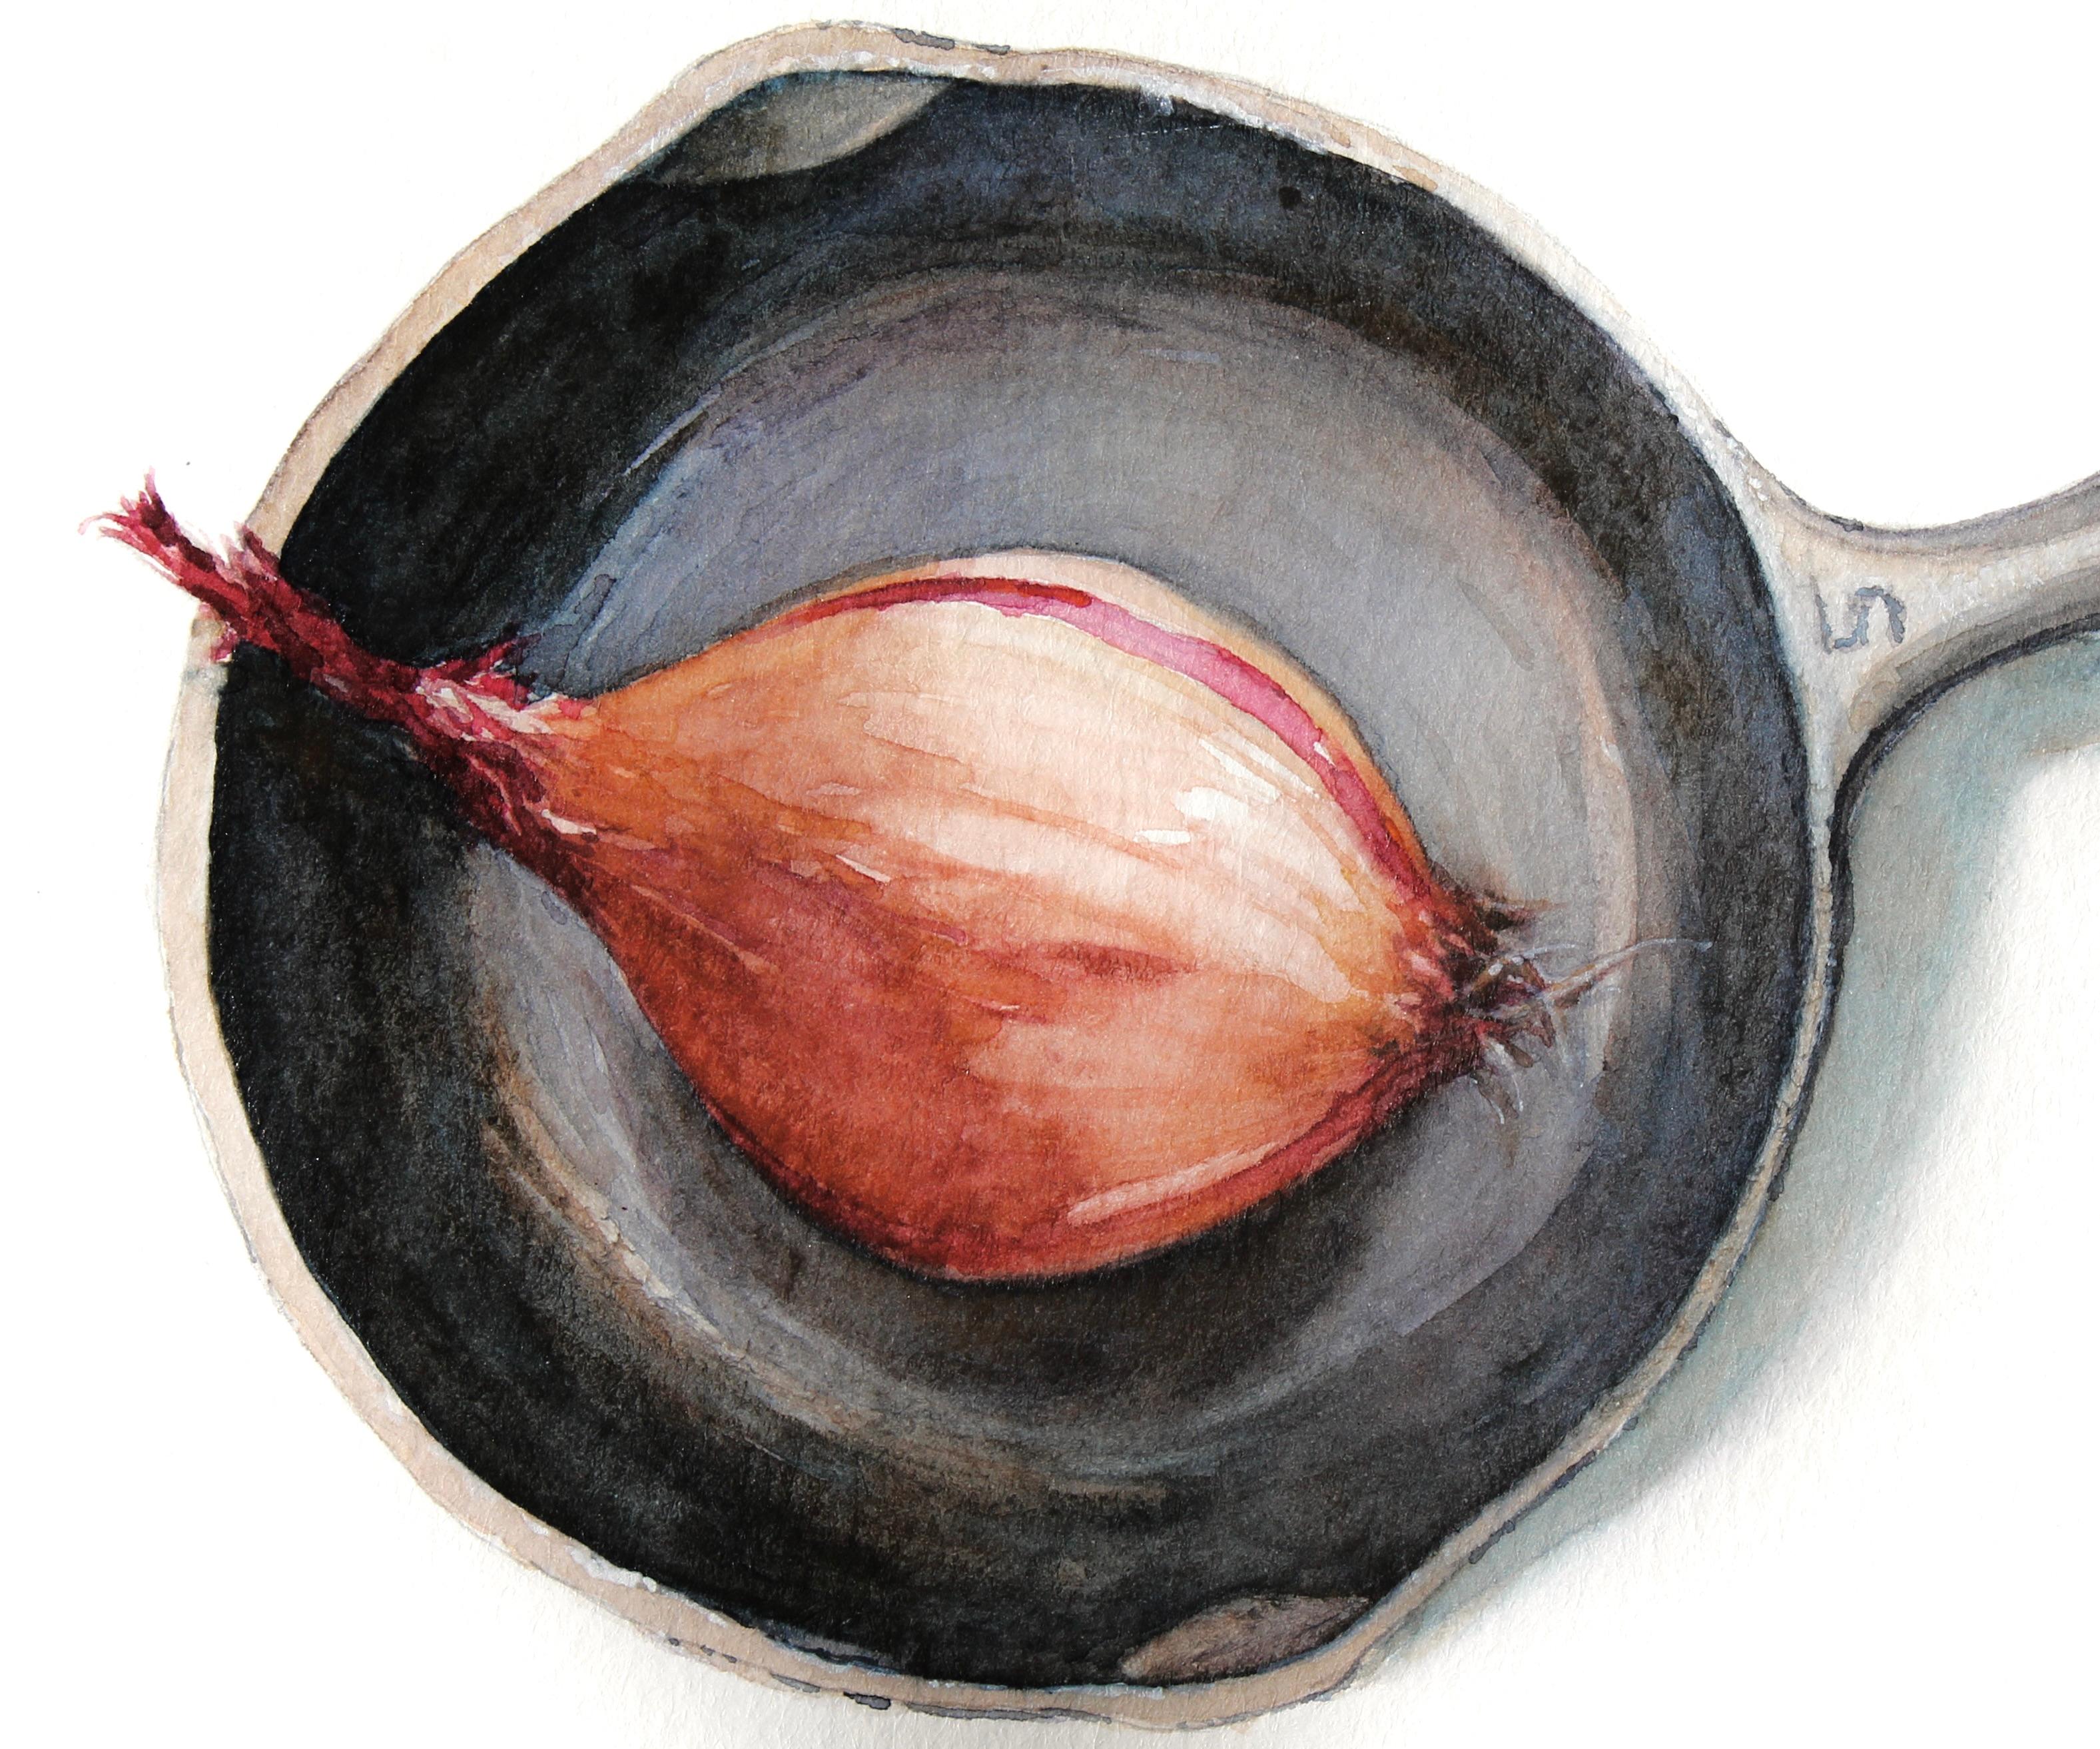 No. 5 with Shallot, Original Painting - American Realist Art by Dwight Smith